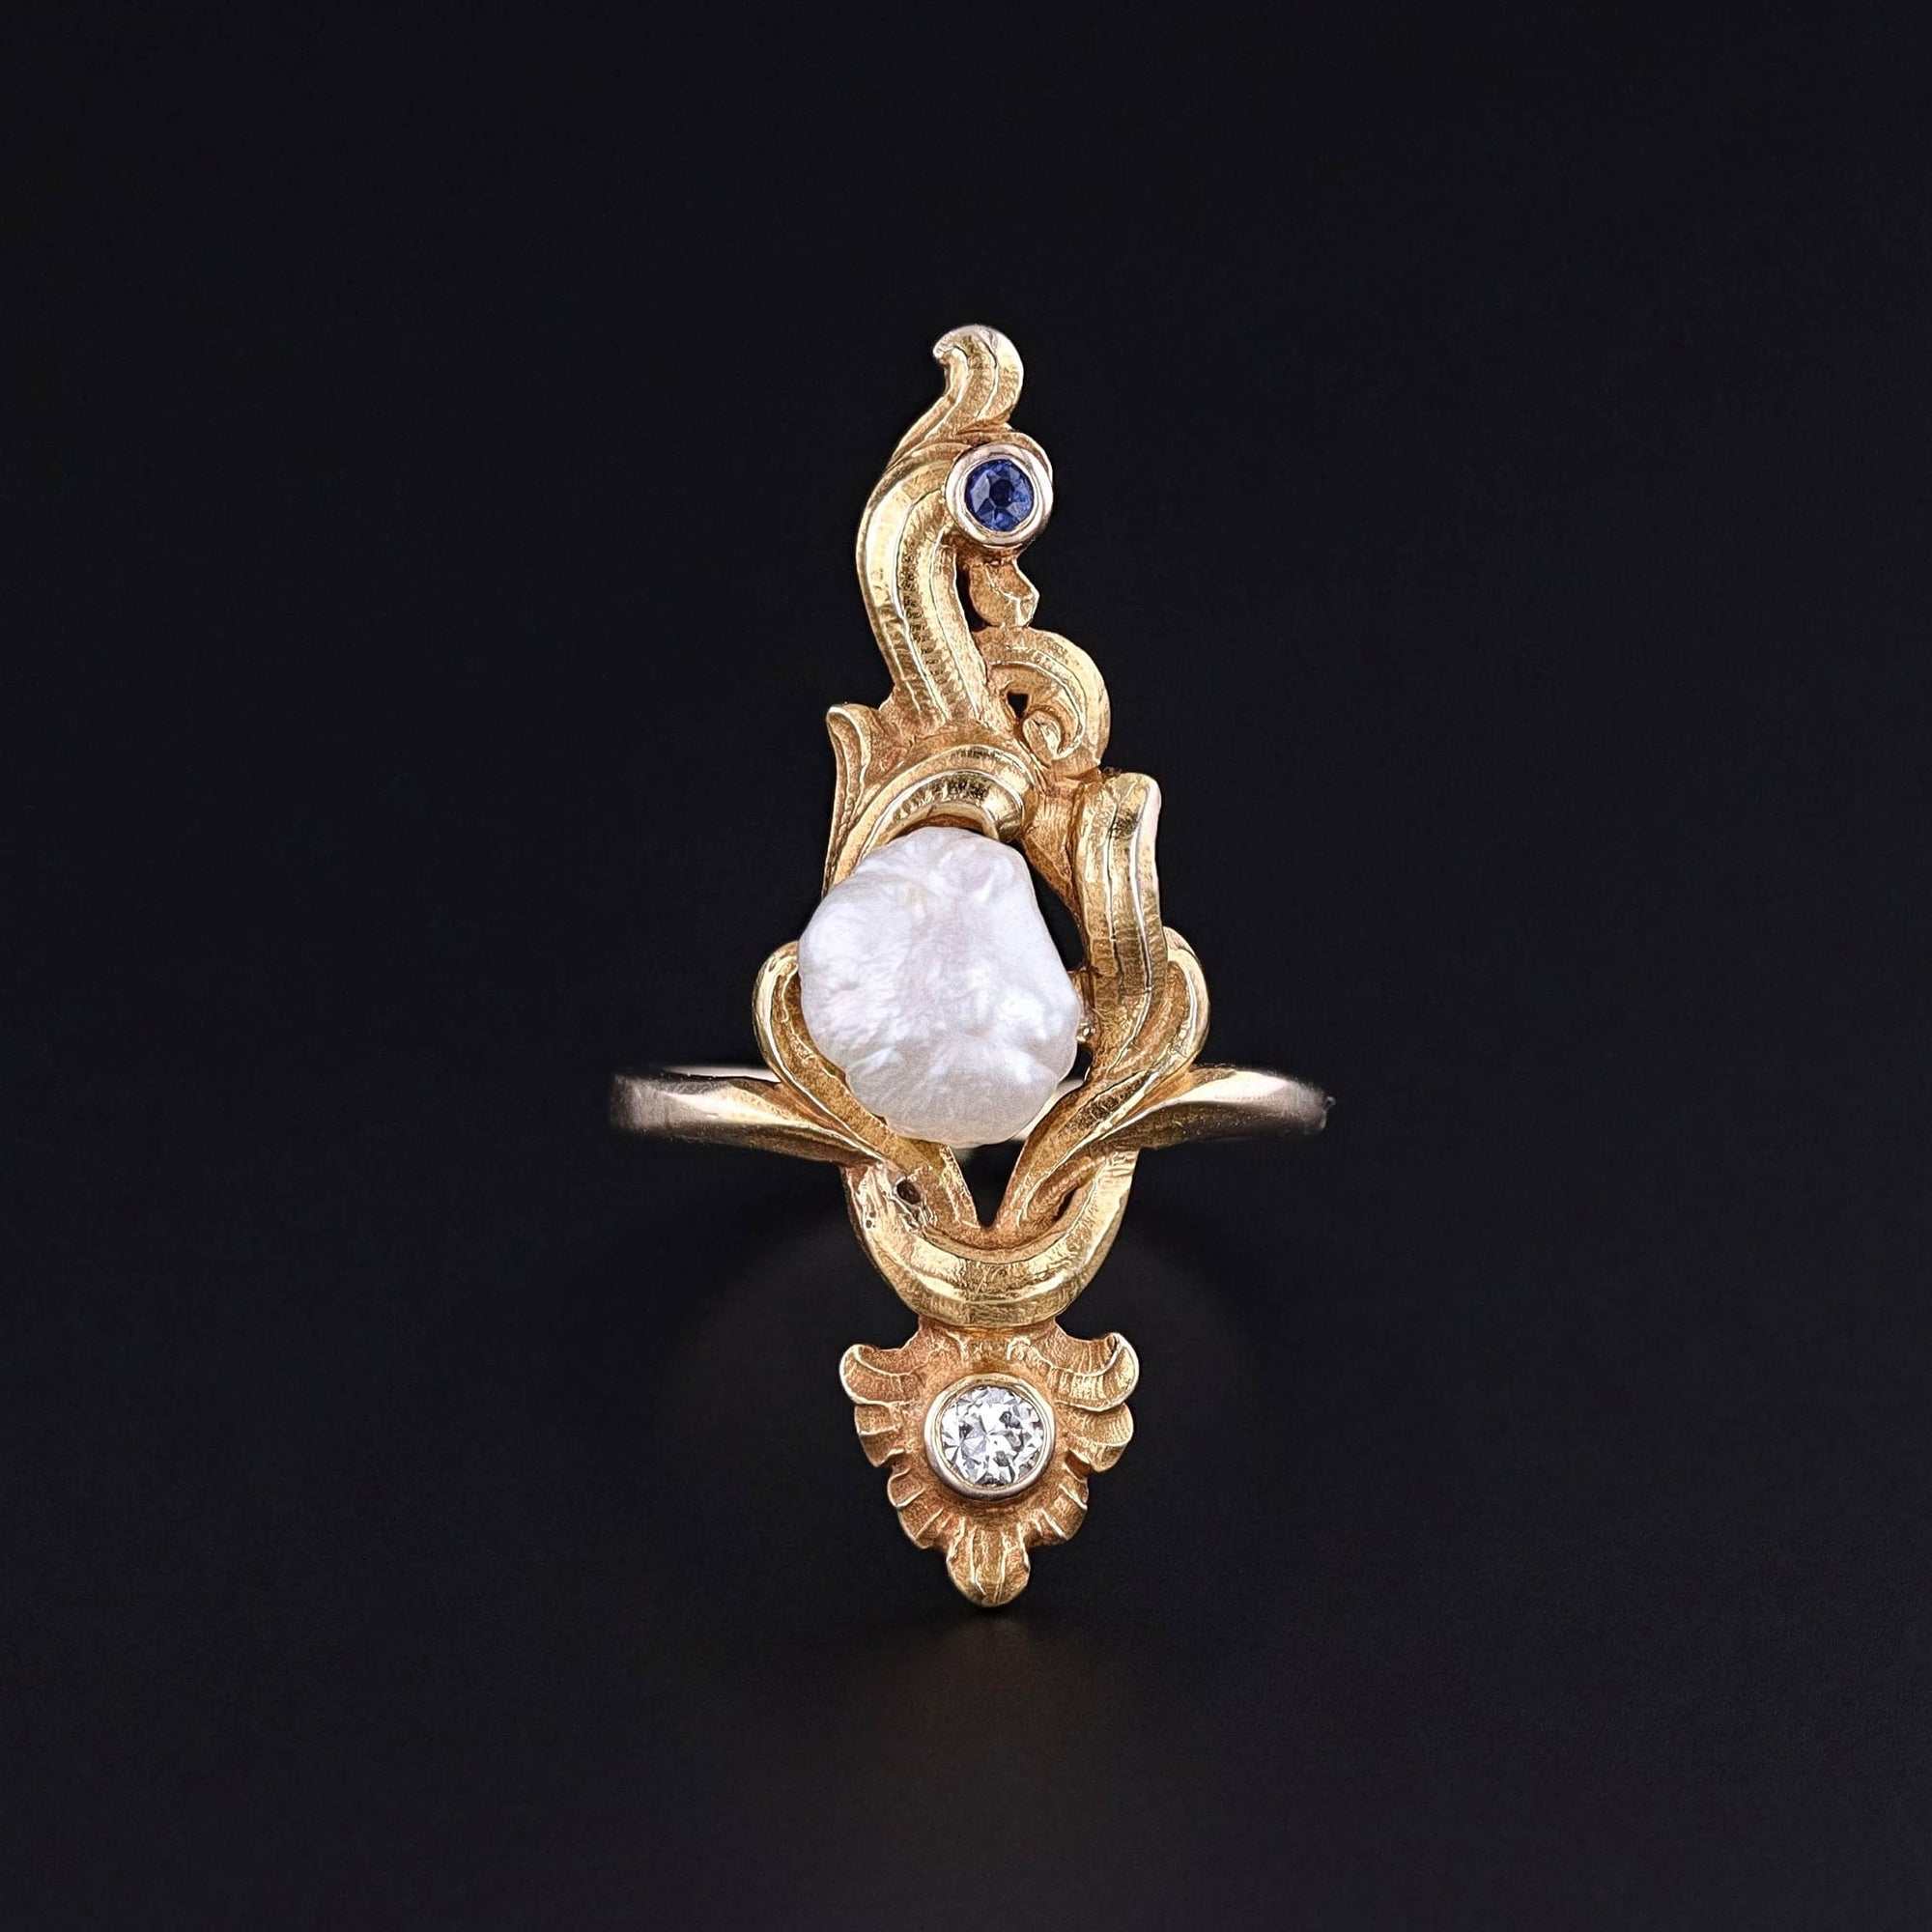 A baroque pearl, diamond, and sapphire ring from the Art Nouveau era. The ring is solid 14k gold and in excellent condition. It can be re-sized free of charge. Perfect for any antique jewelry collector or ring collector.